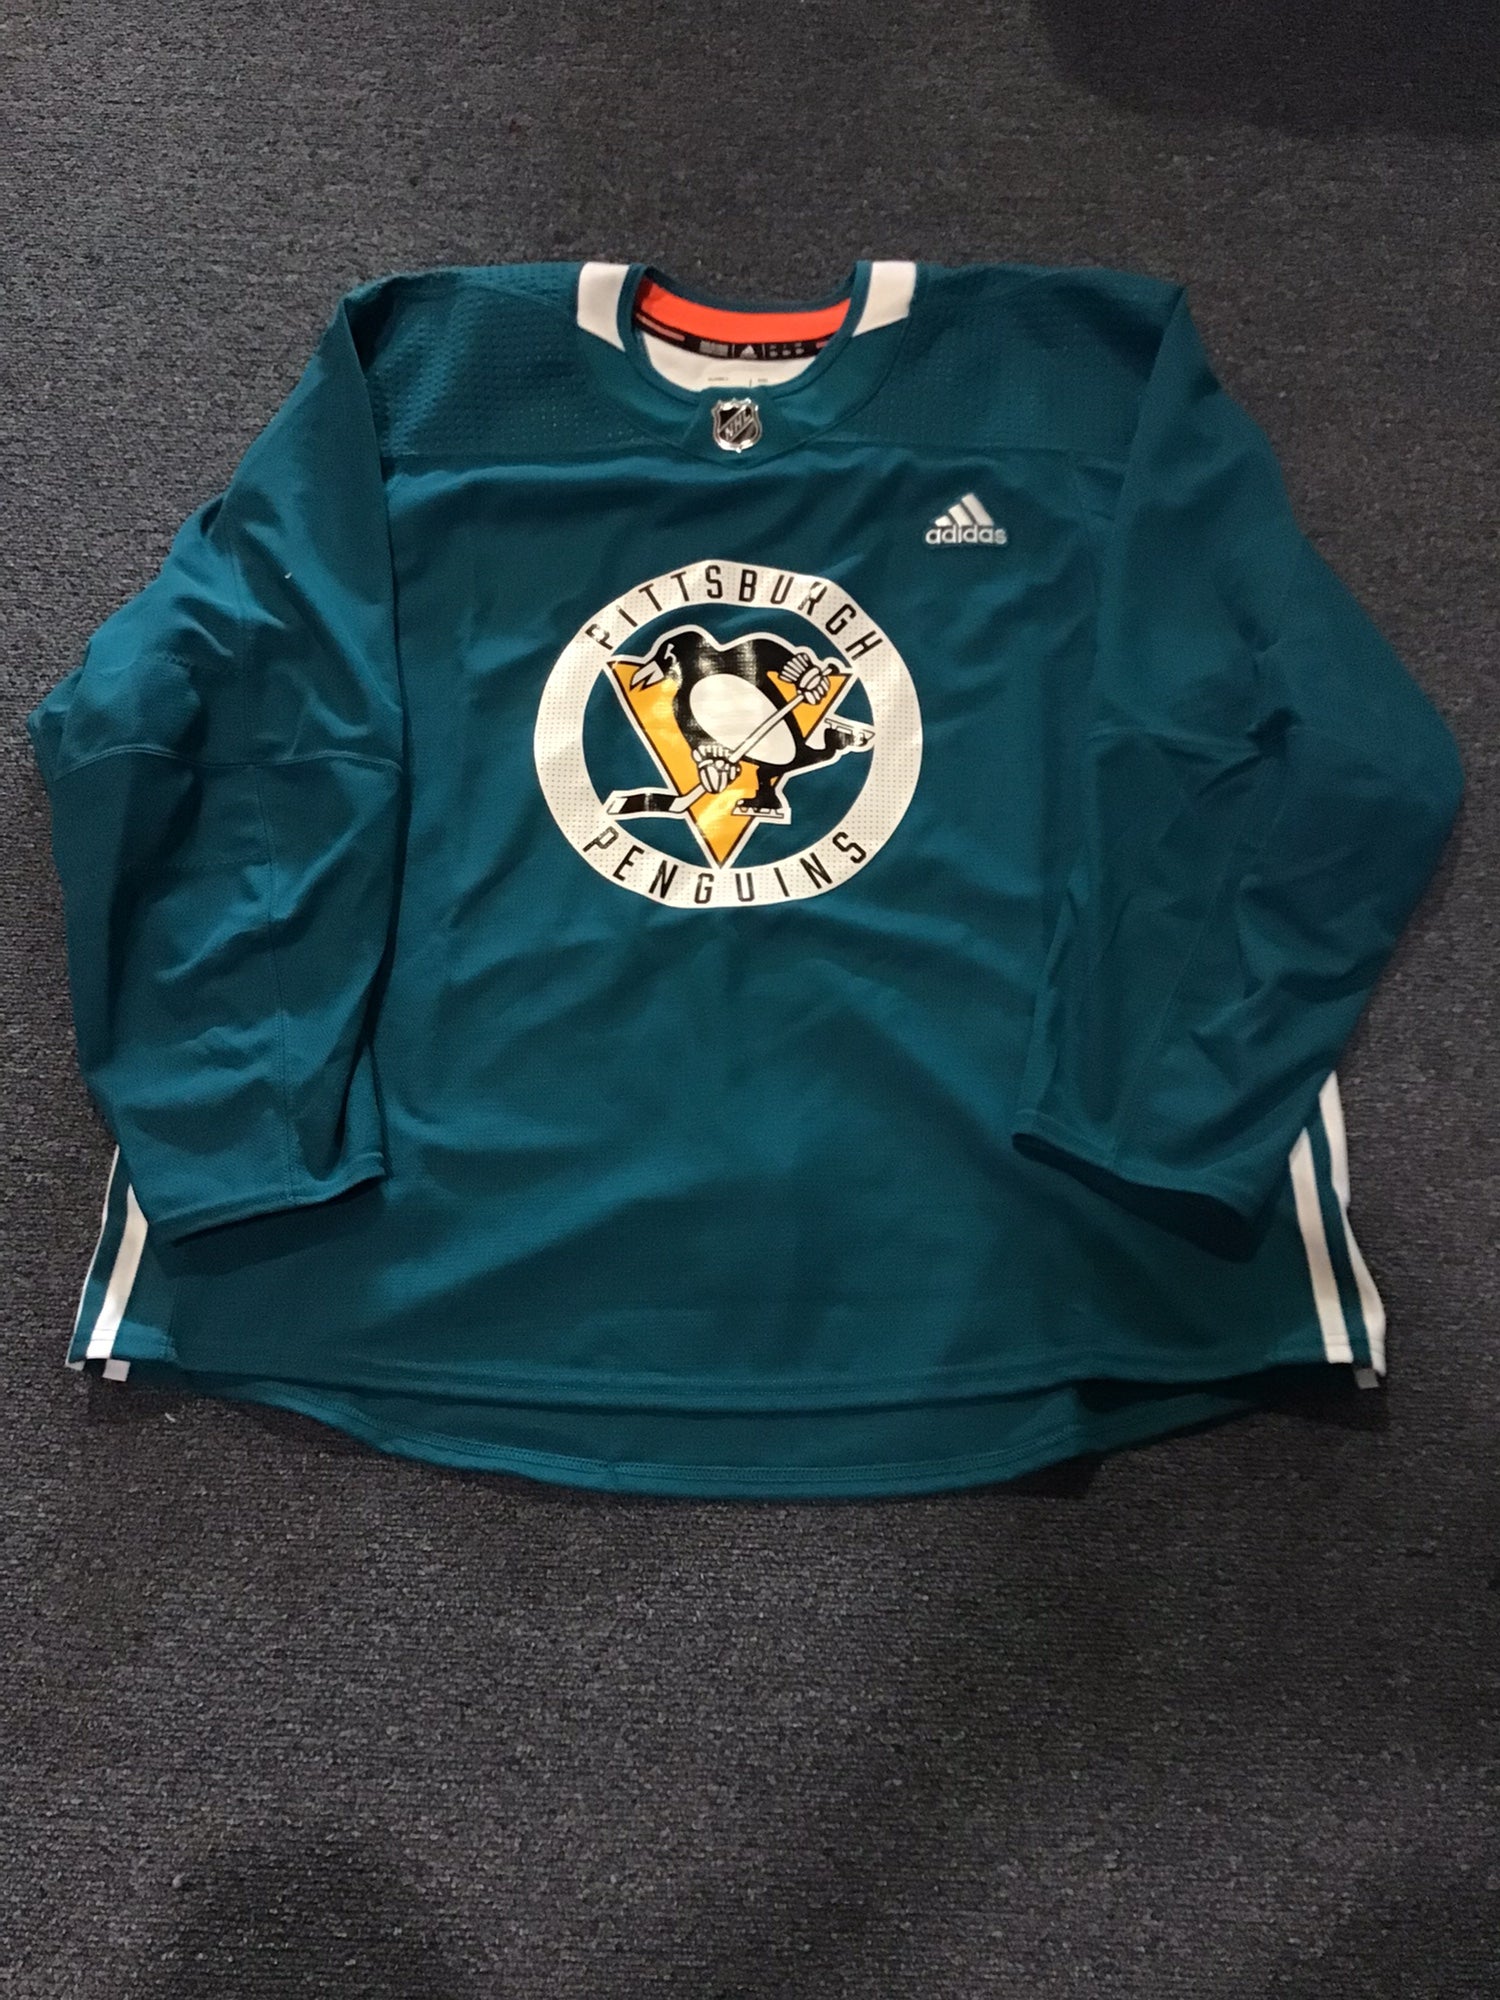 Pittsburgh Penguins Adidas Practice Jersey